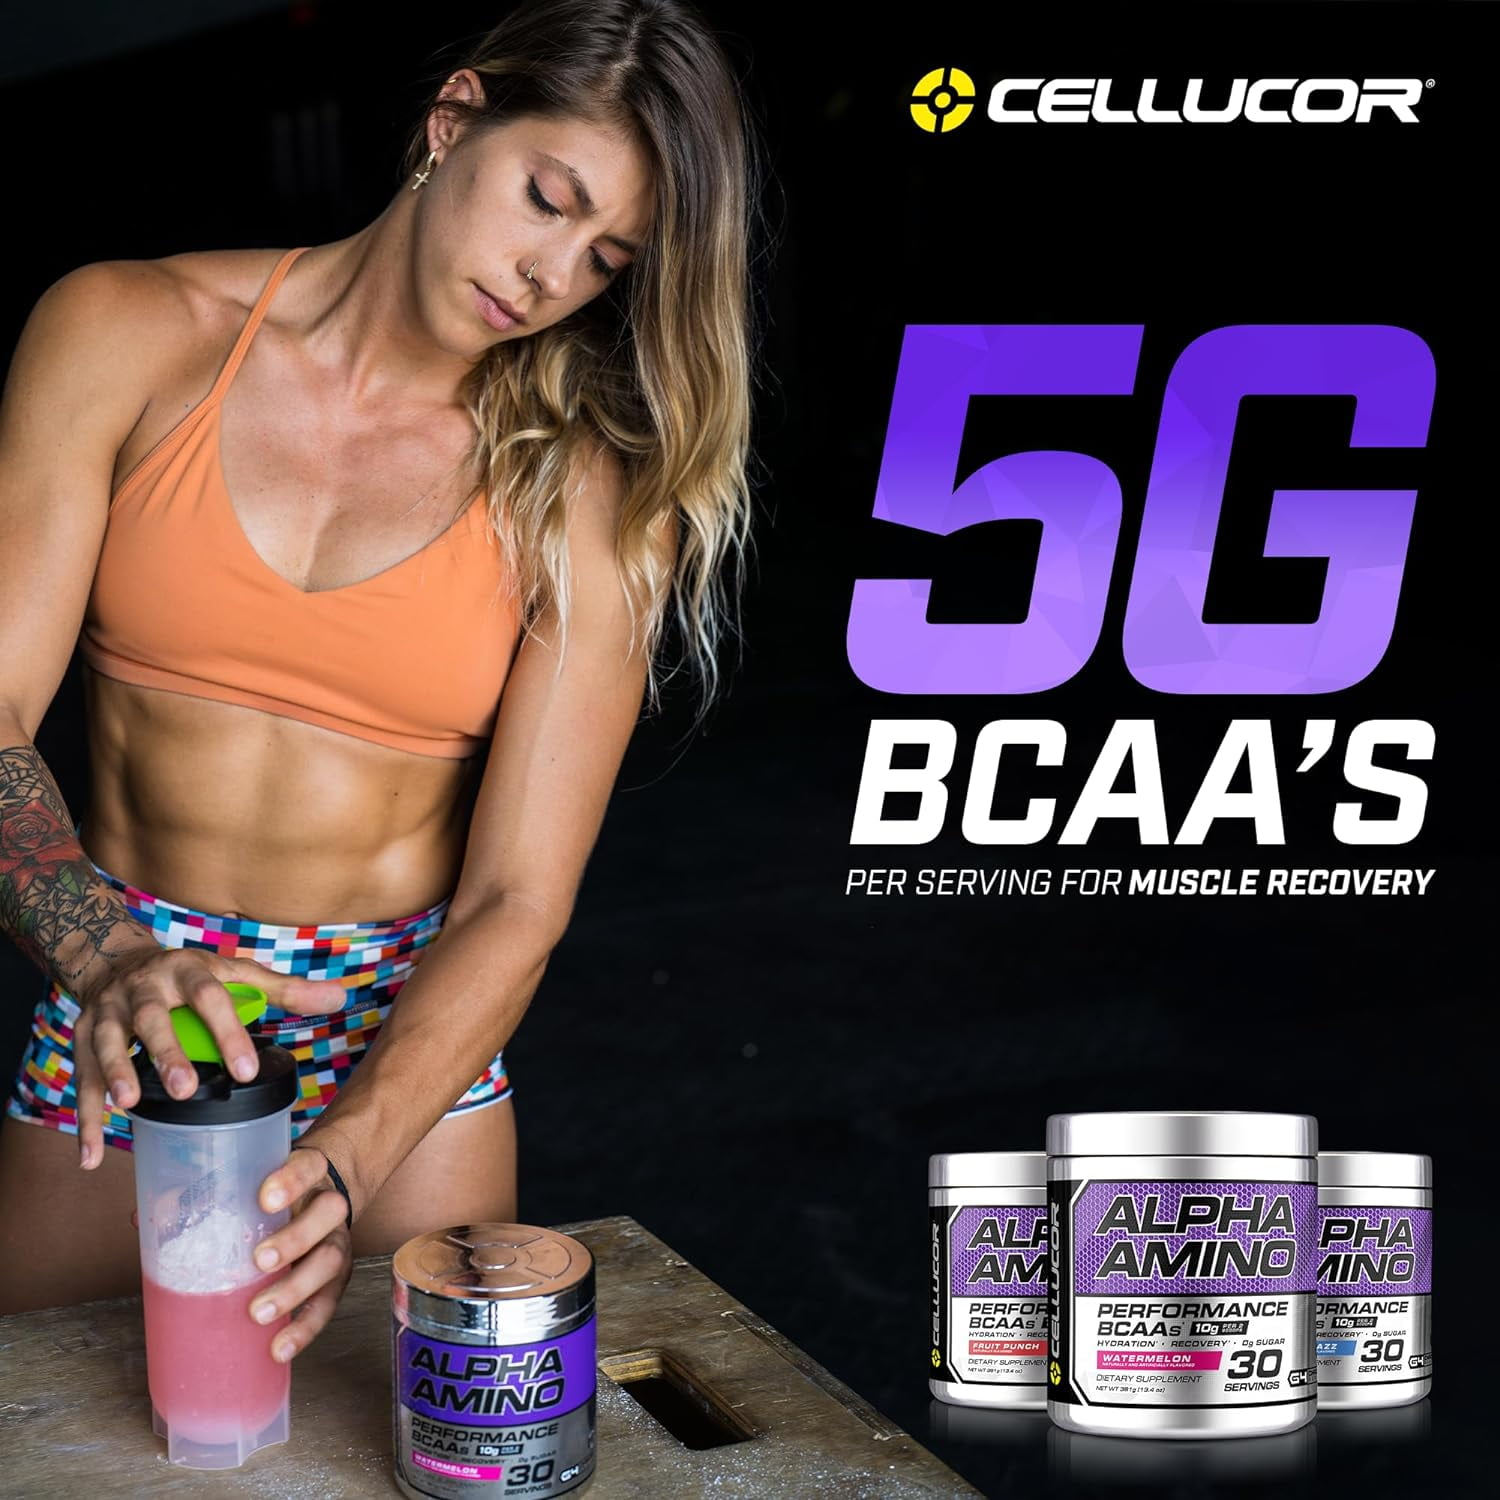 Cellucor Alpha Amino Powder + Fruit Punch + EAA & BCAA + Electrolytes +  Recovery + 30 Servings